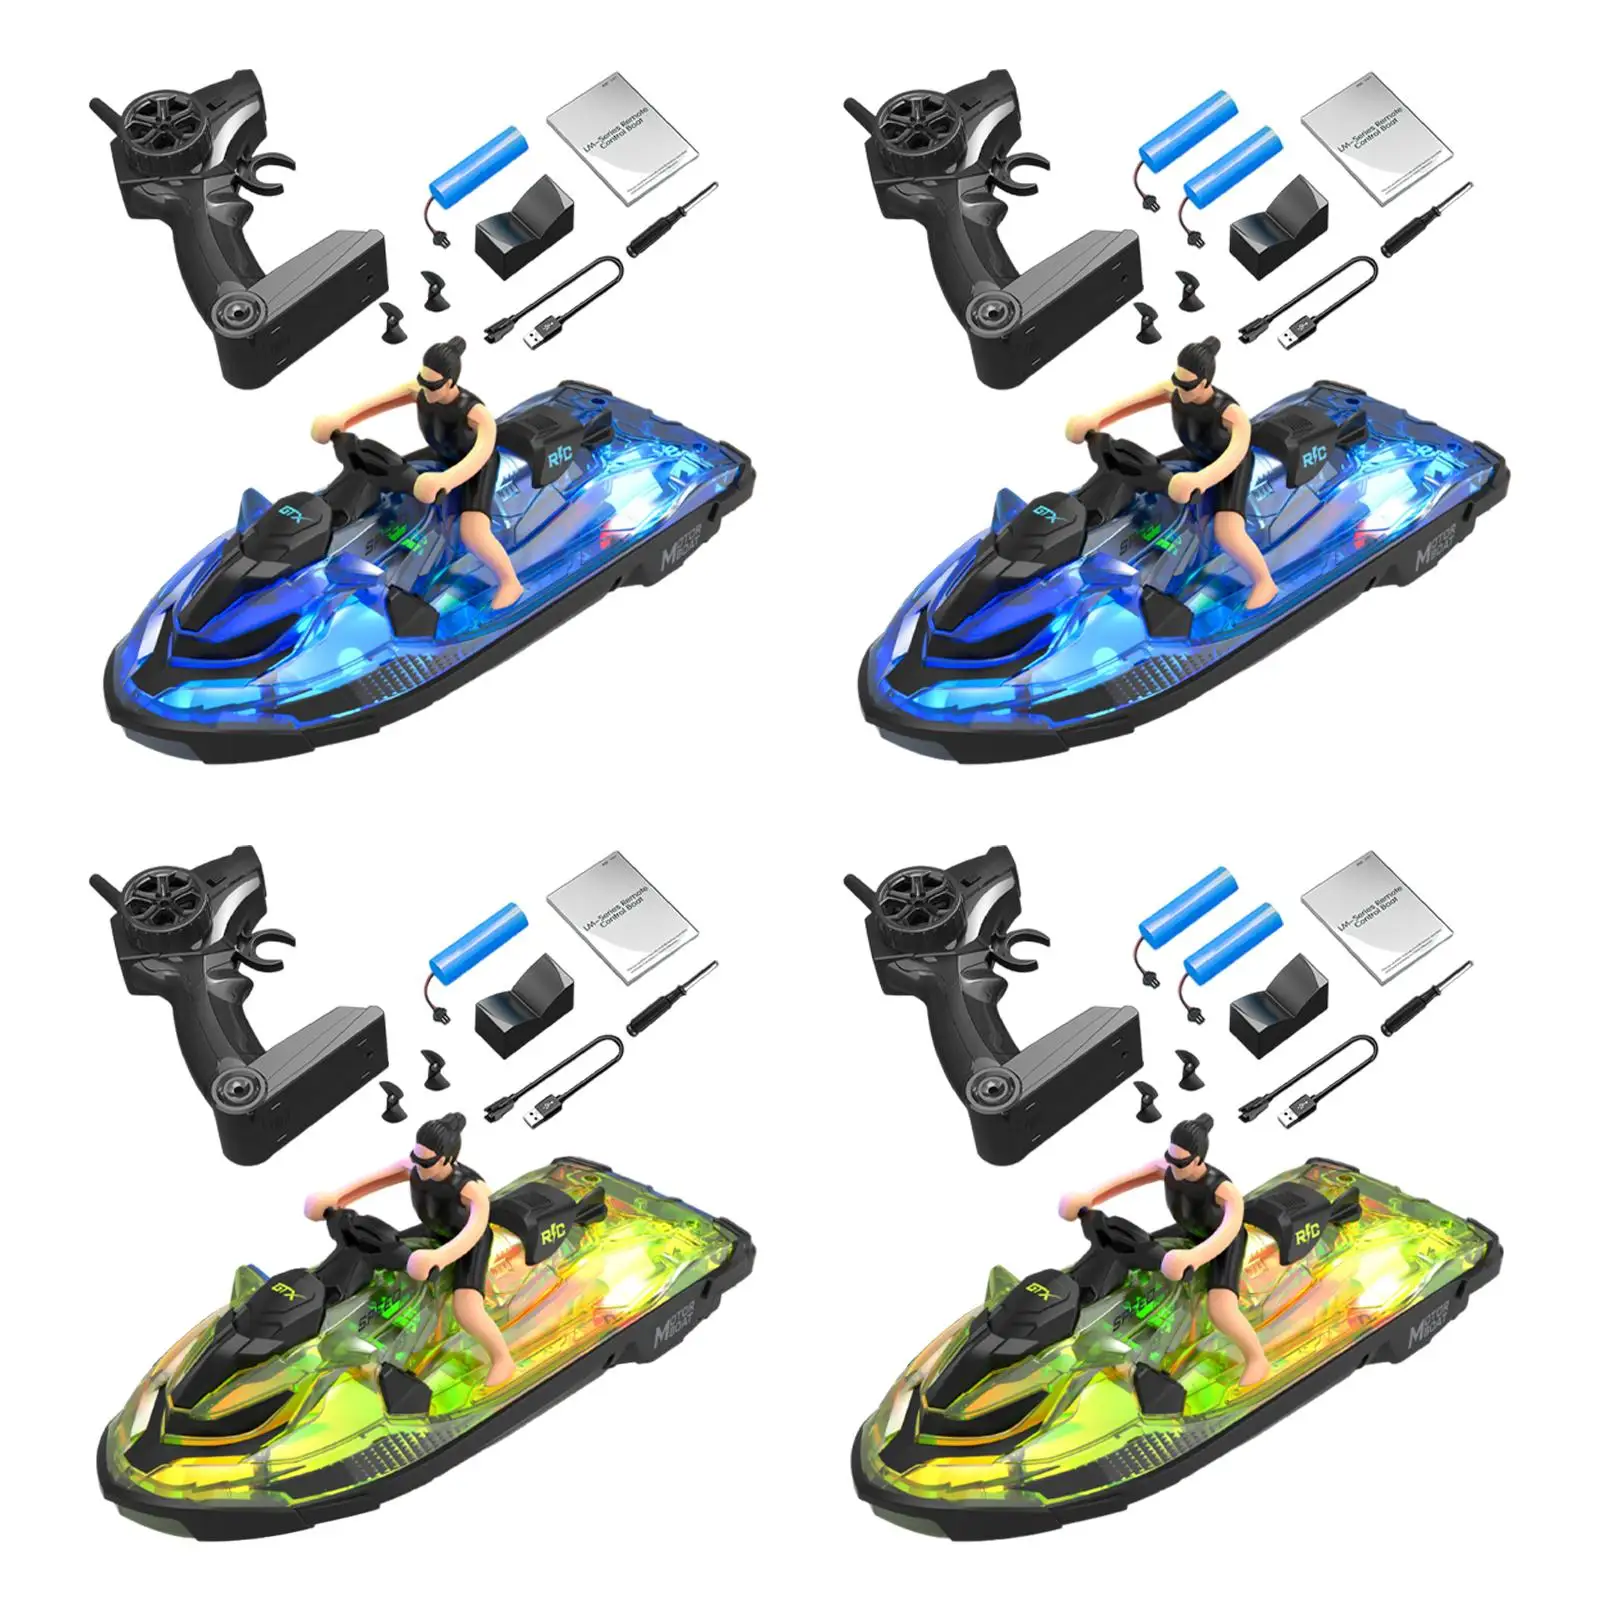 RC Boat Simulation 2 Gears Speed Adjustment Waterproof Ship Toy Fast Remote Control Boat for Kids Girls Boys Birthday Gifts